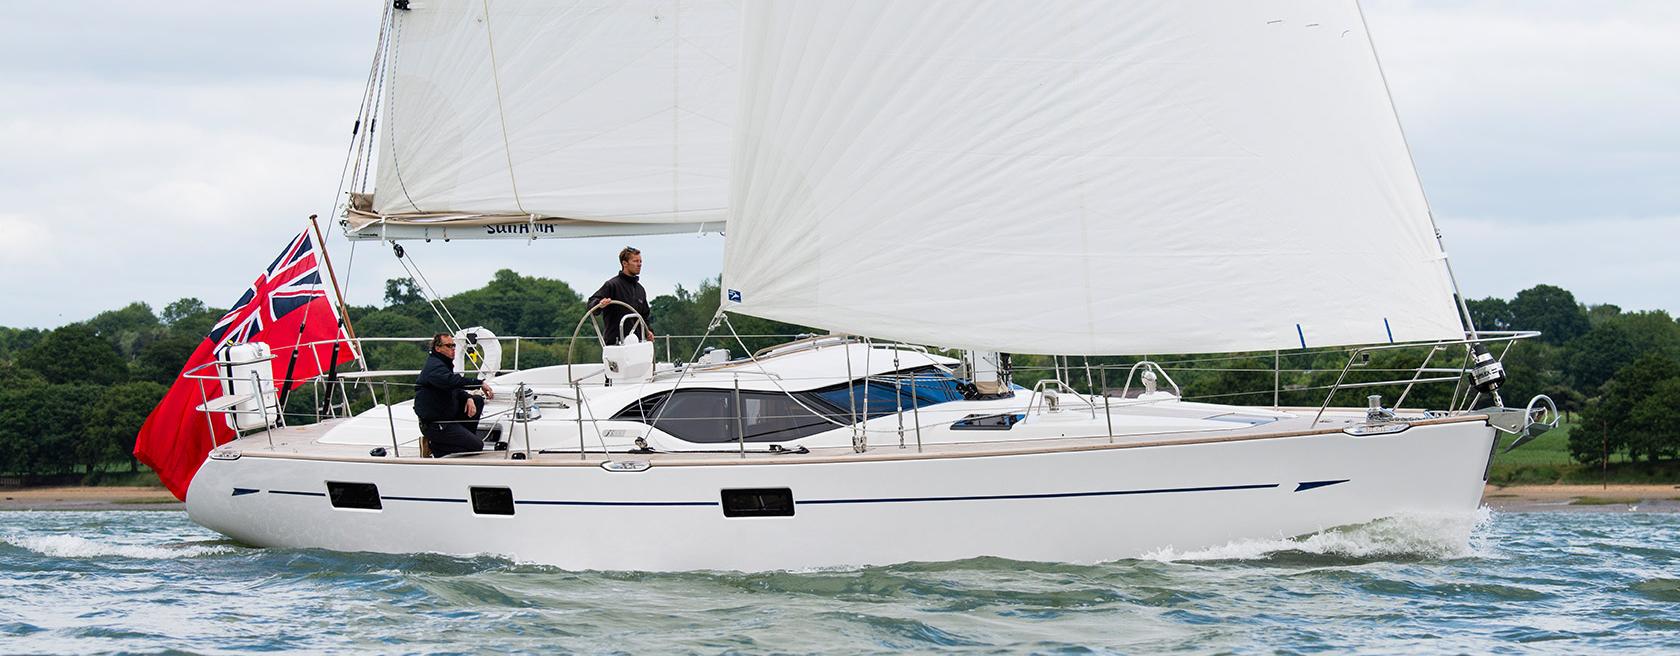 Oyster 475 under sail